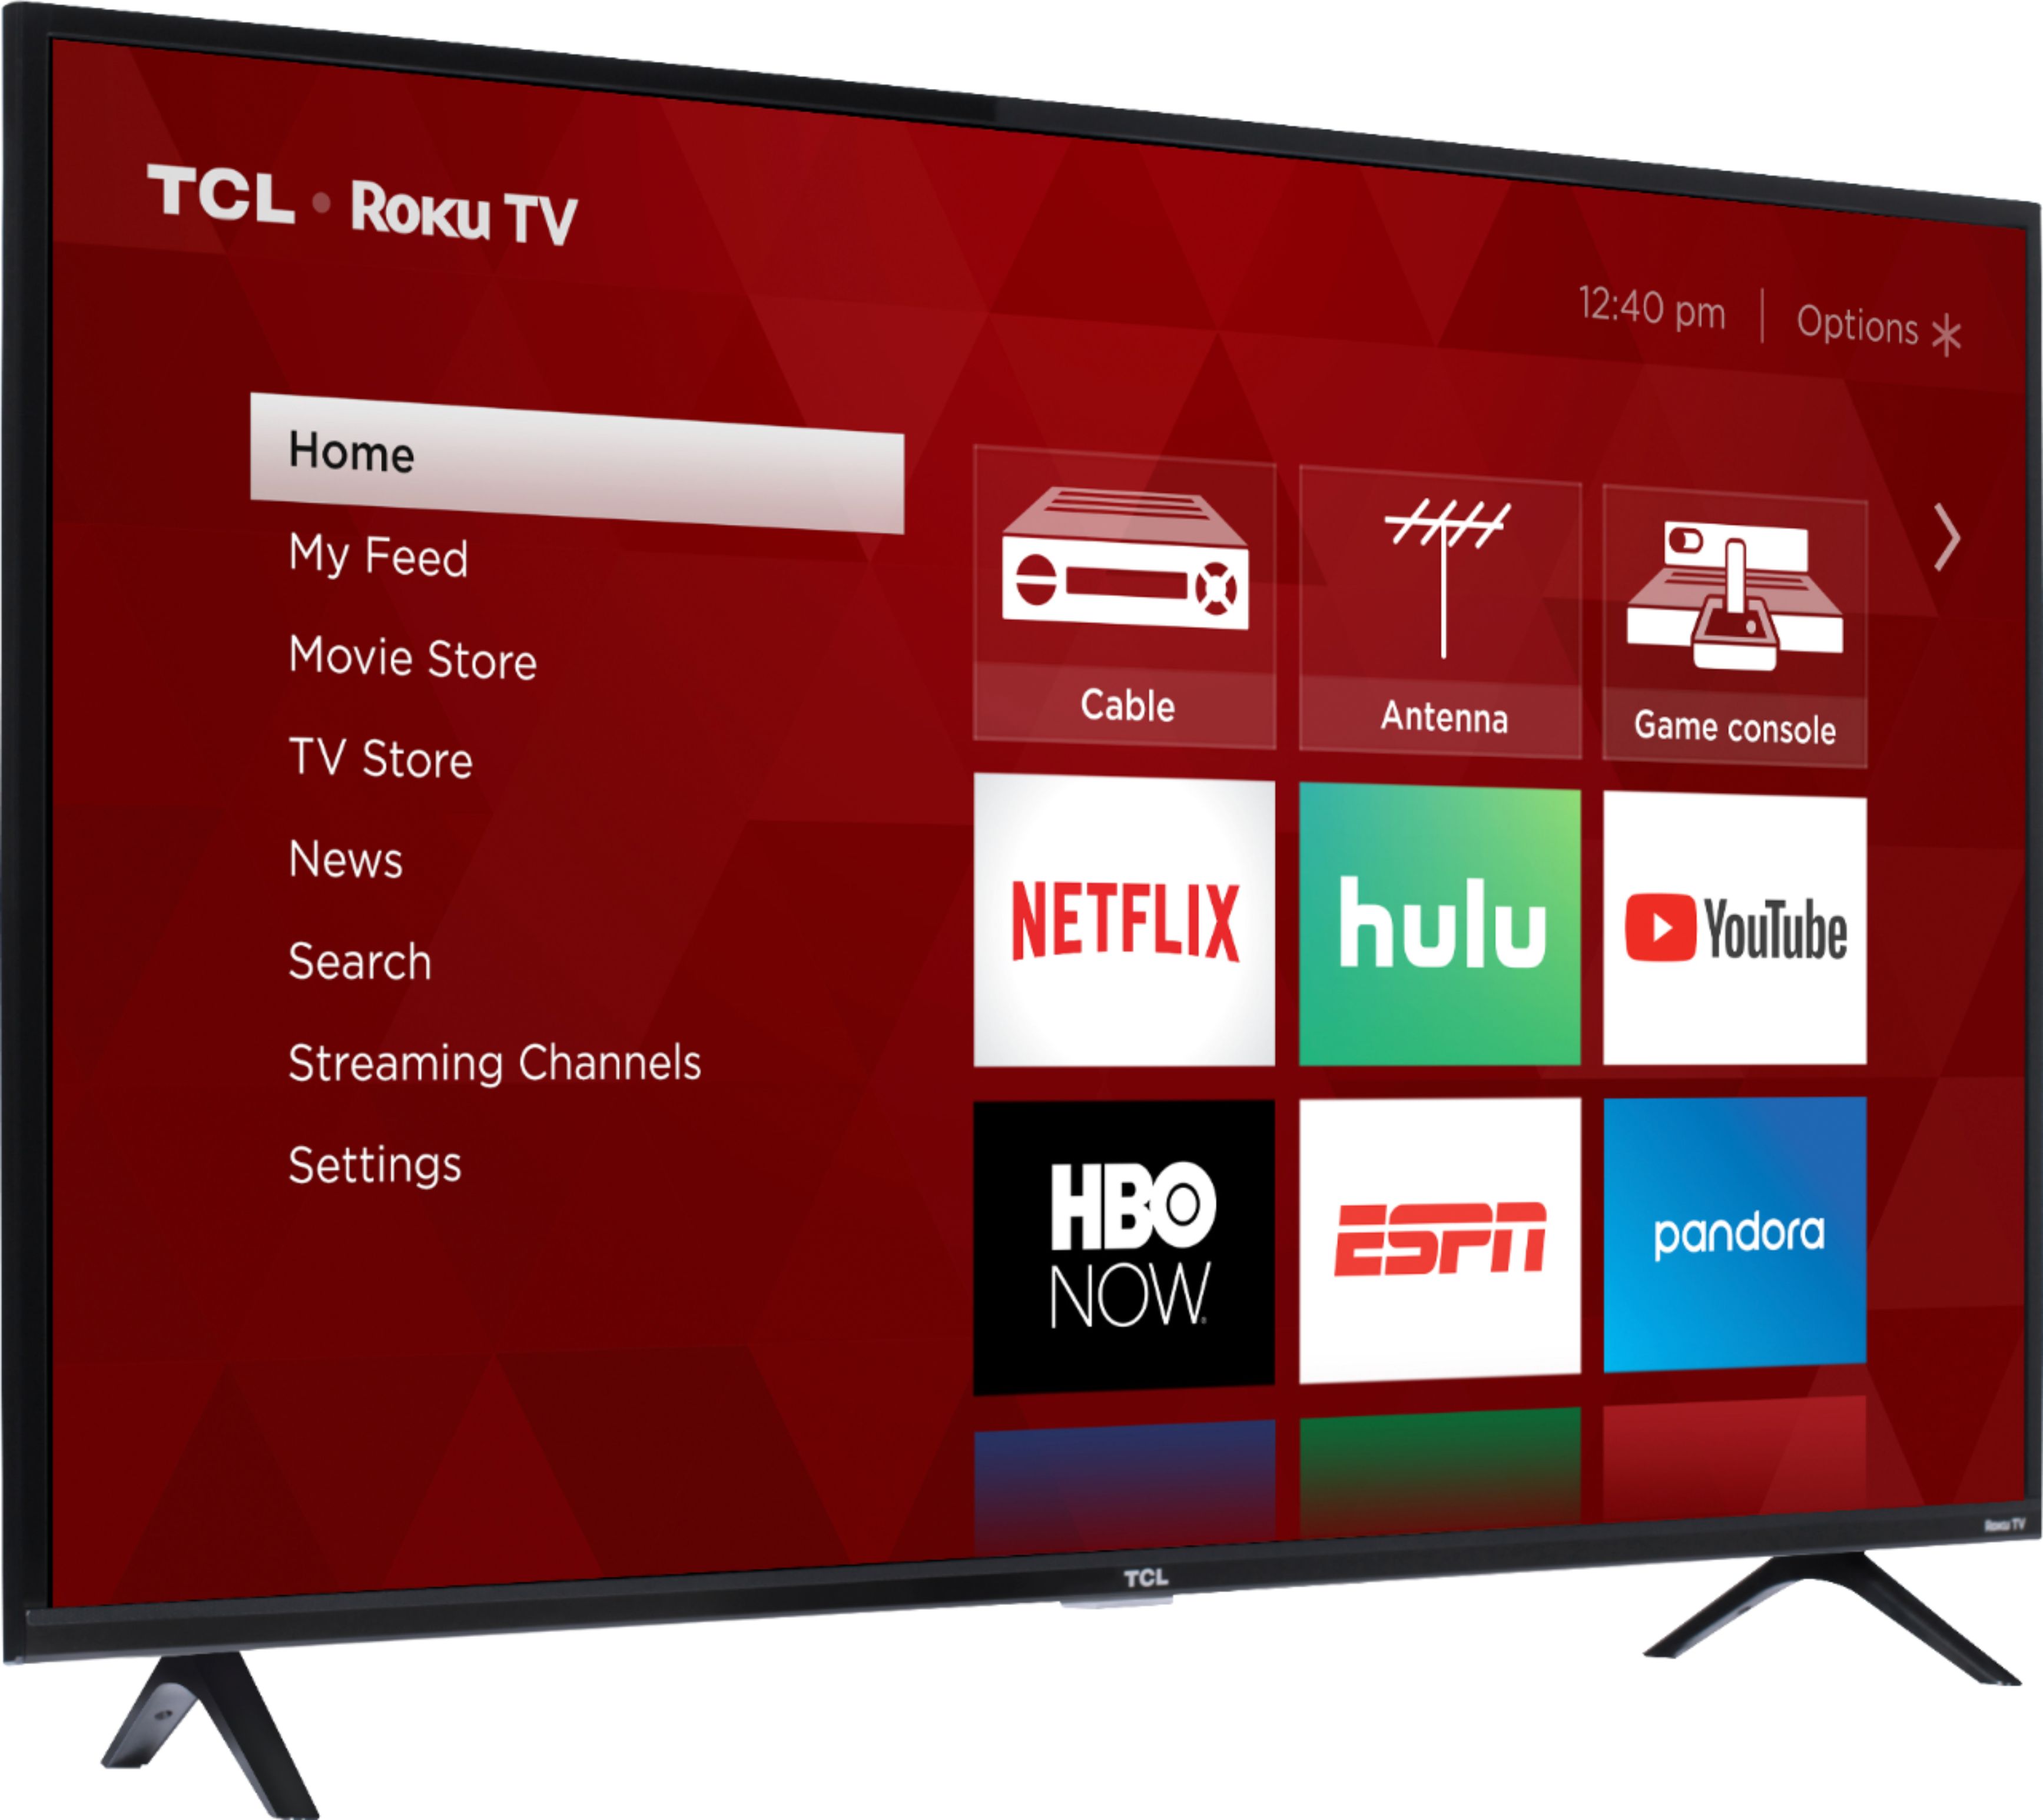 TCL US5800 series (Roku TV, 2016) review: Roku TVs add 4K resolution to the  best smart TV system - CNET